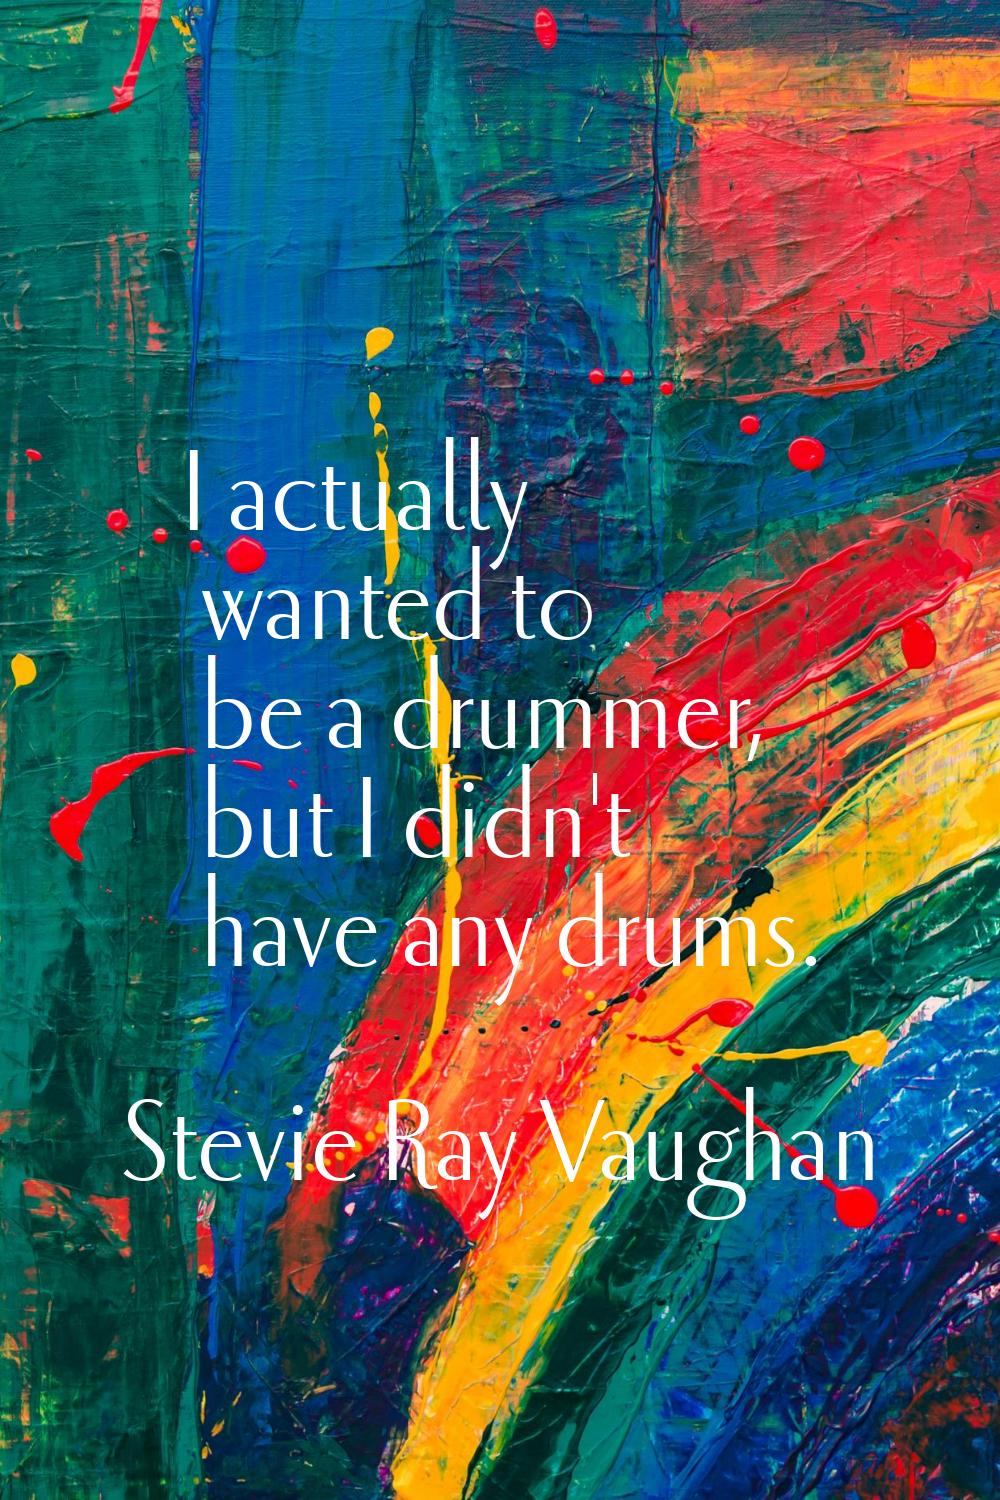 I actually wanted to be a drummer, but I didn't have any drums.